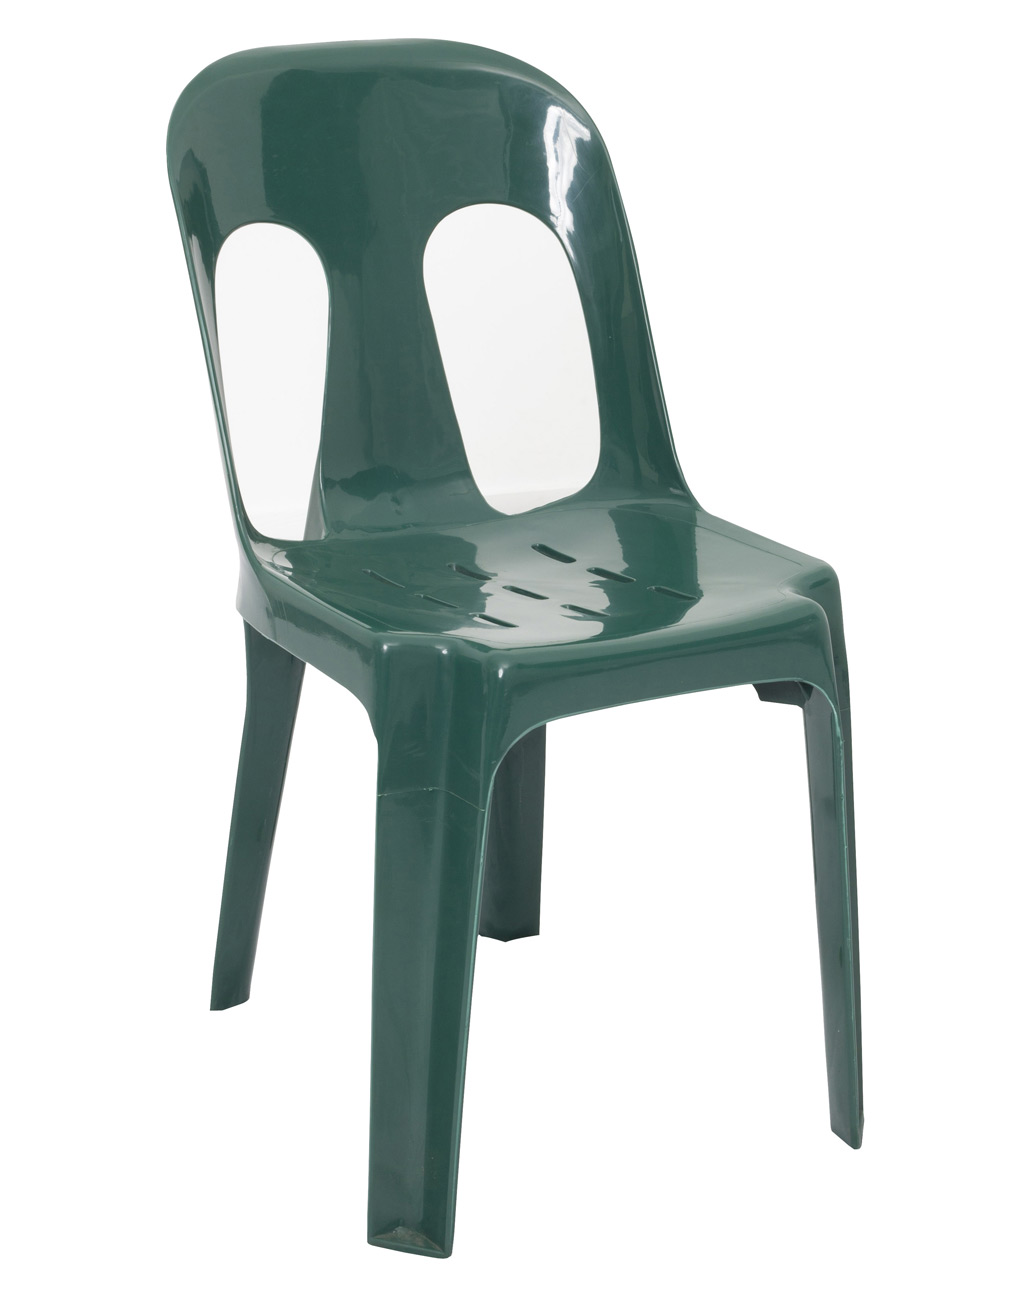 PIPEE-green-chair-benchmark